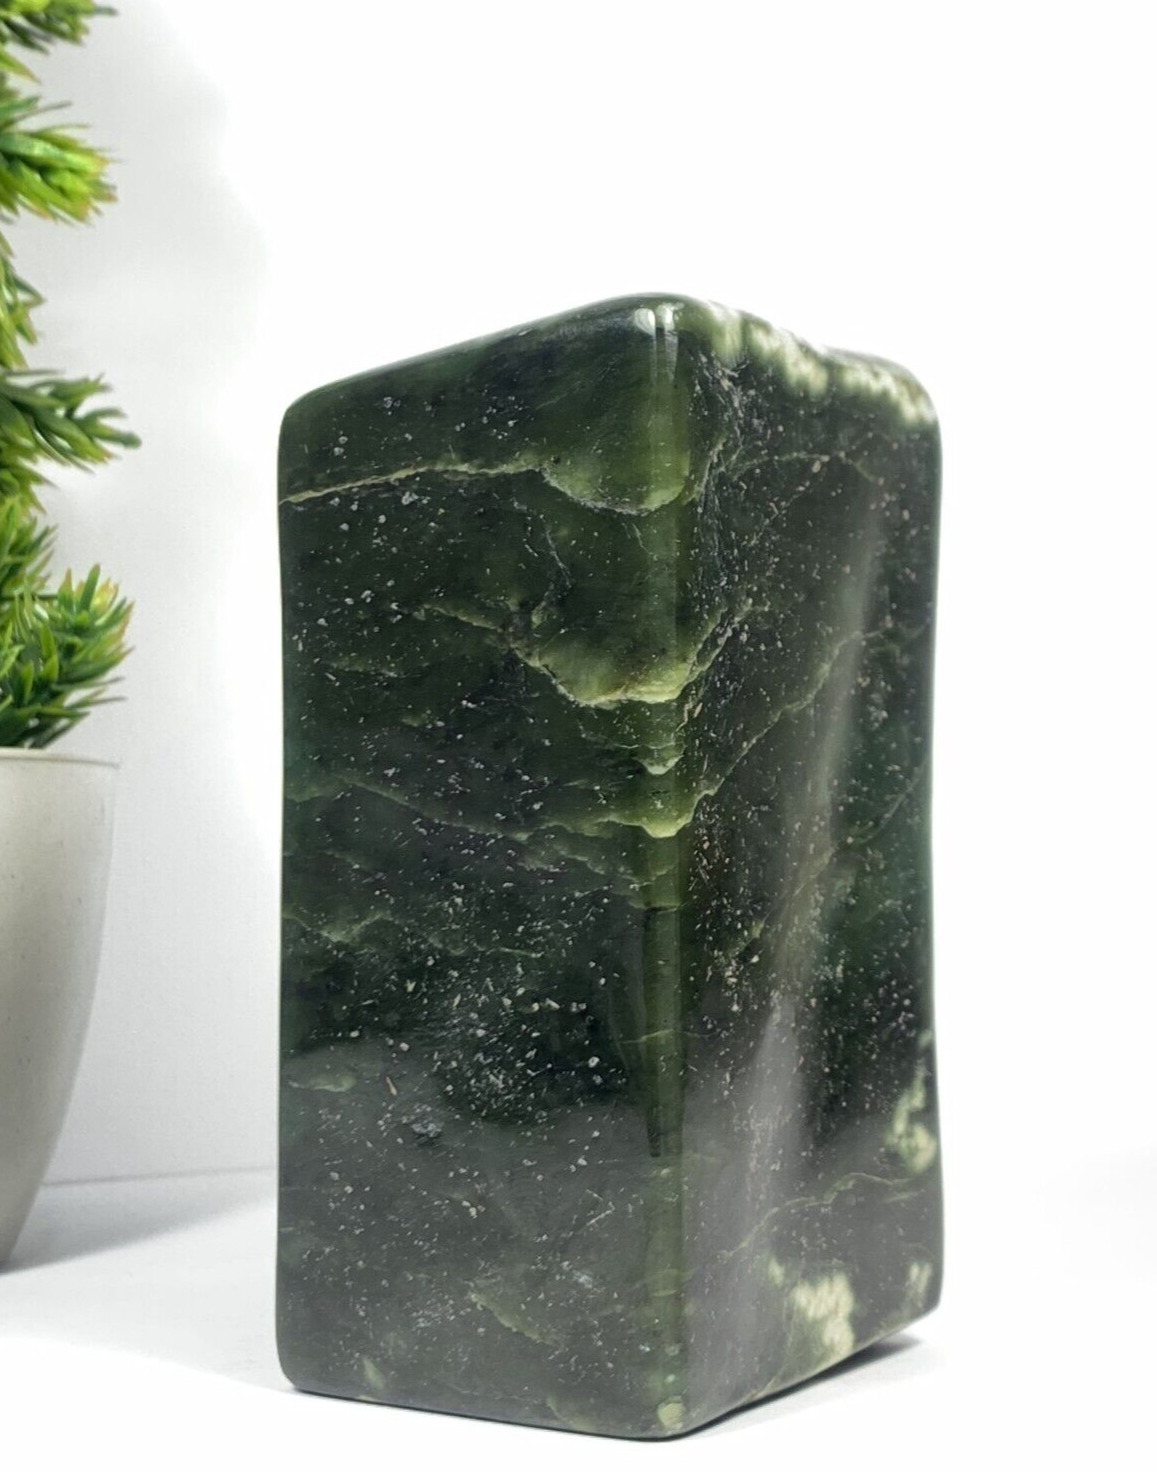 1094 Grams Polished Green Natural Nephrite Jade Freeform,Tumble from Afghanistan